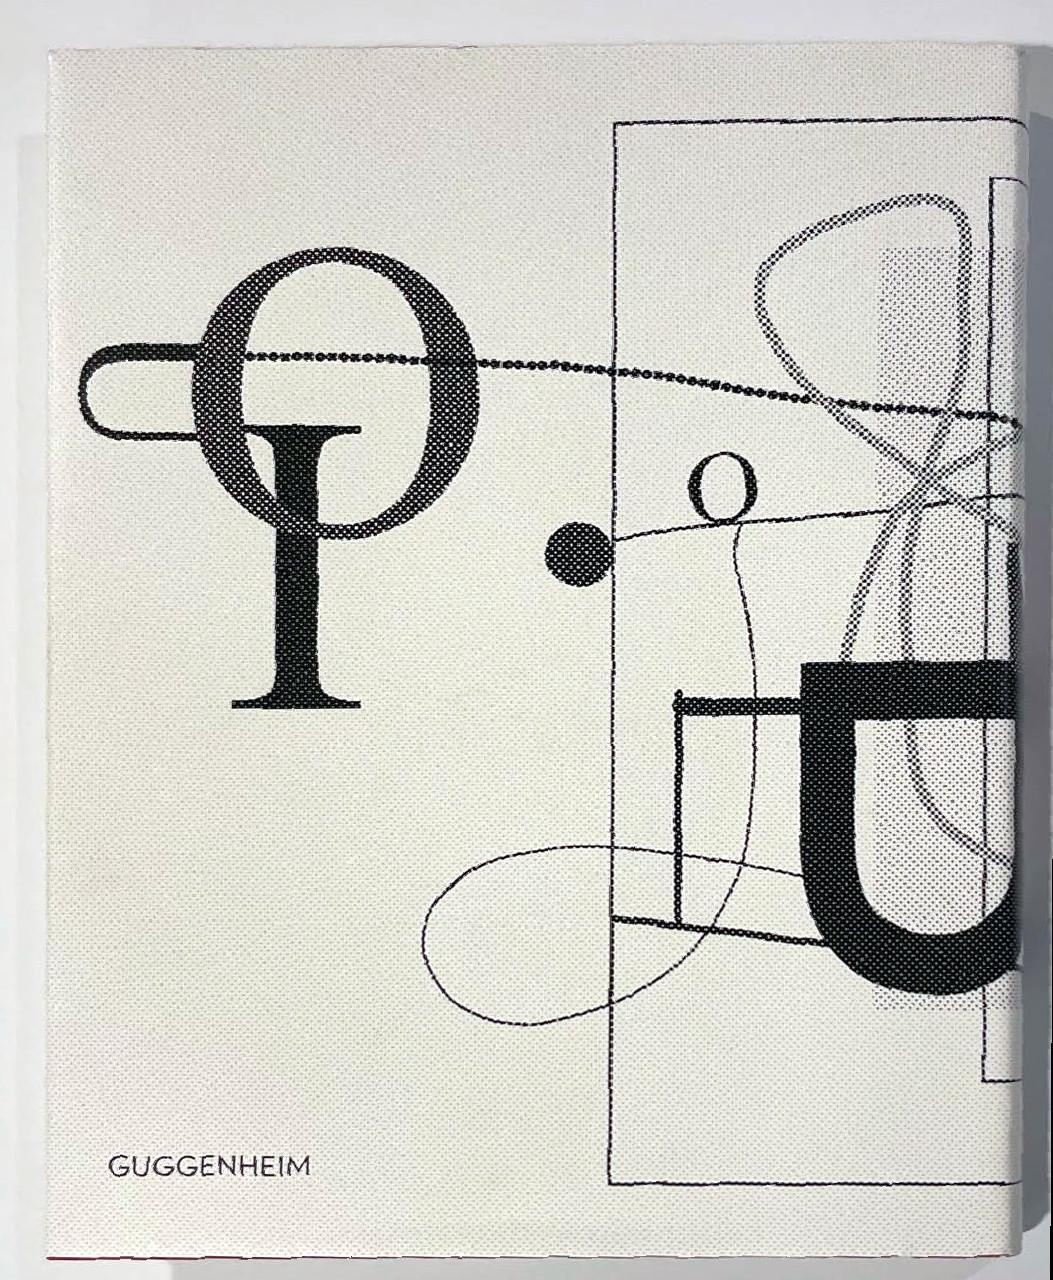 Christopher Wool Guggenheim Monograph, Hand signed and dated by Christopher Wool For Sale 1